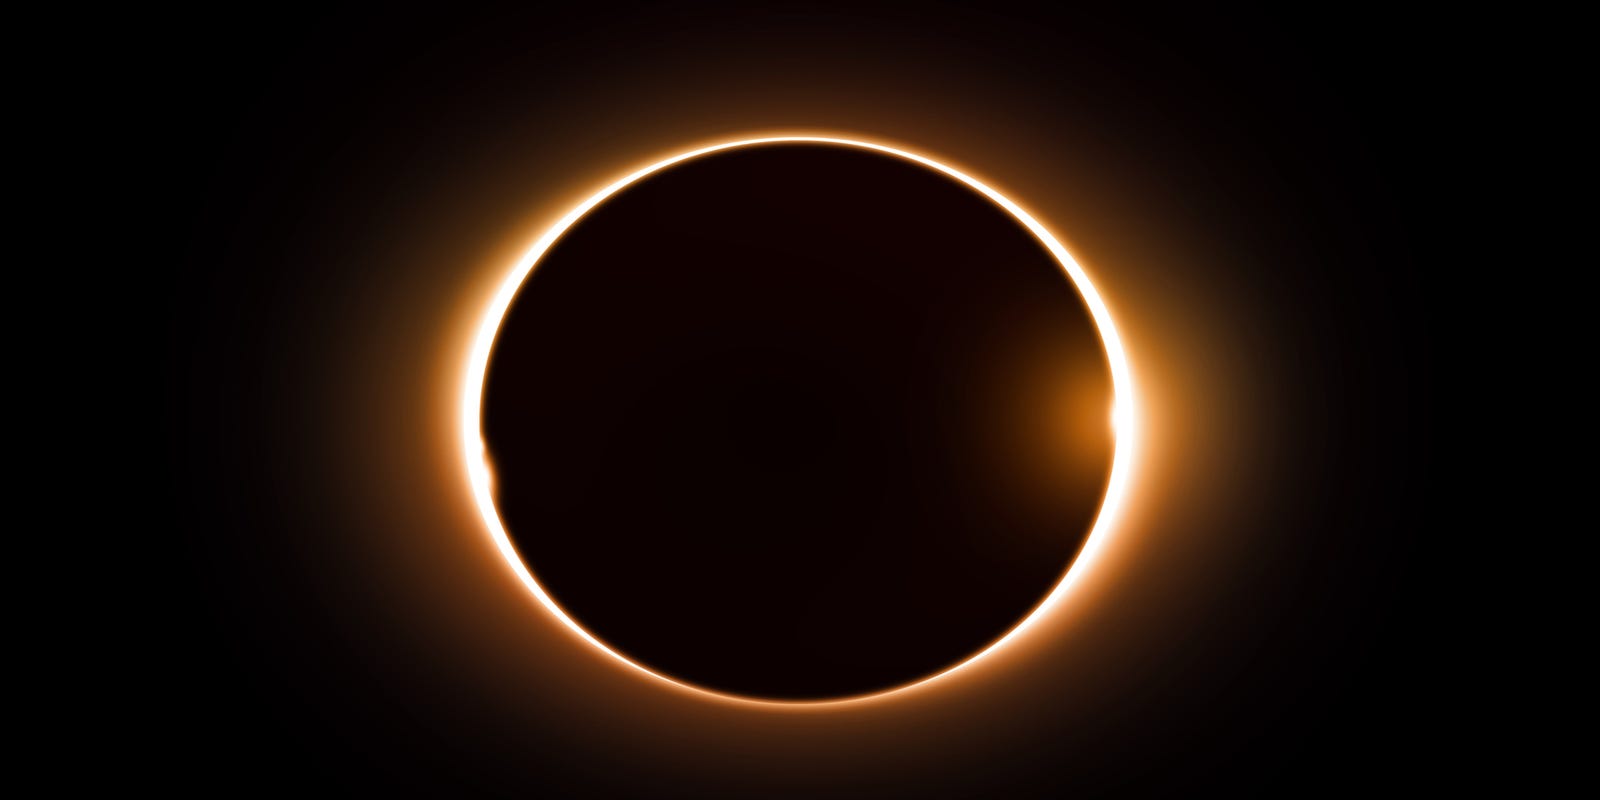 Solar eclipse: What time eclipse where I live?